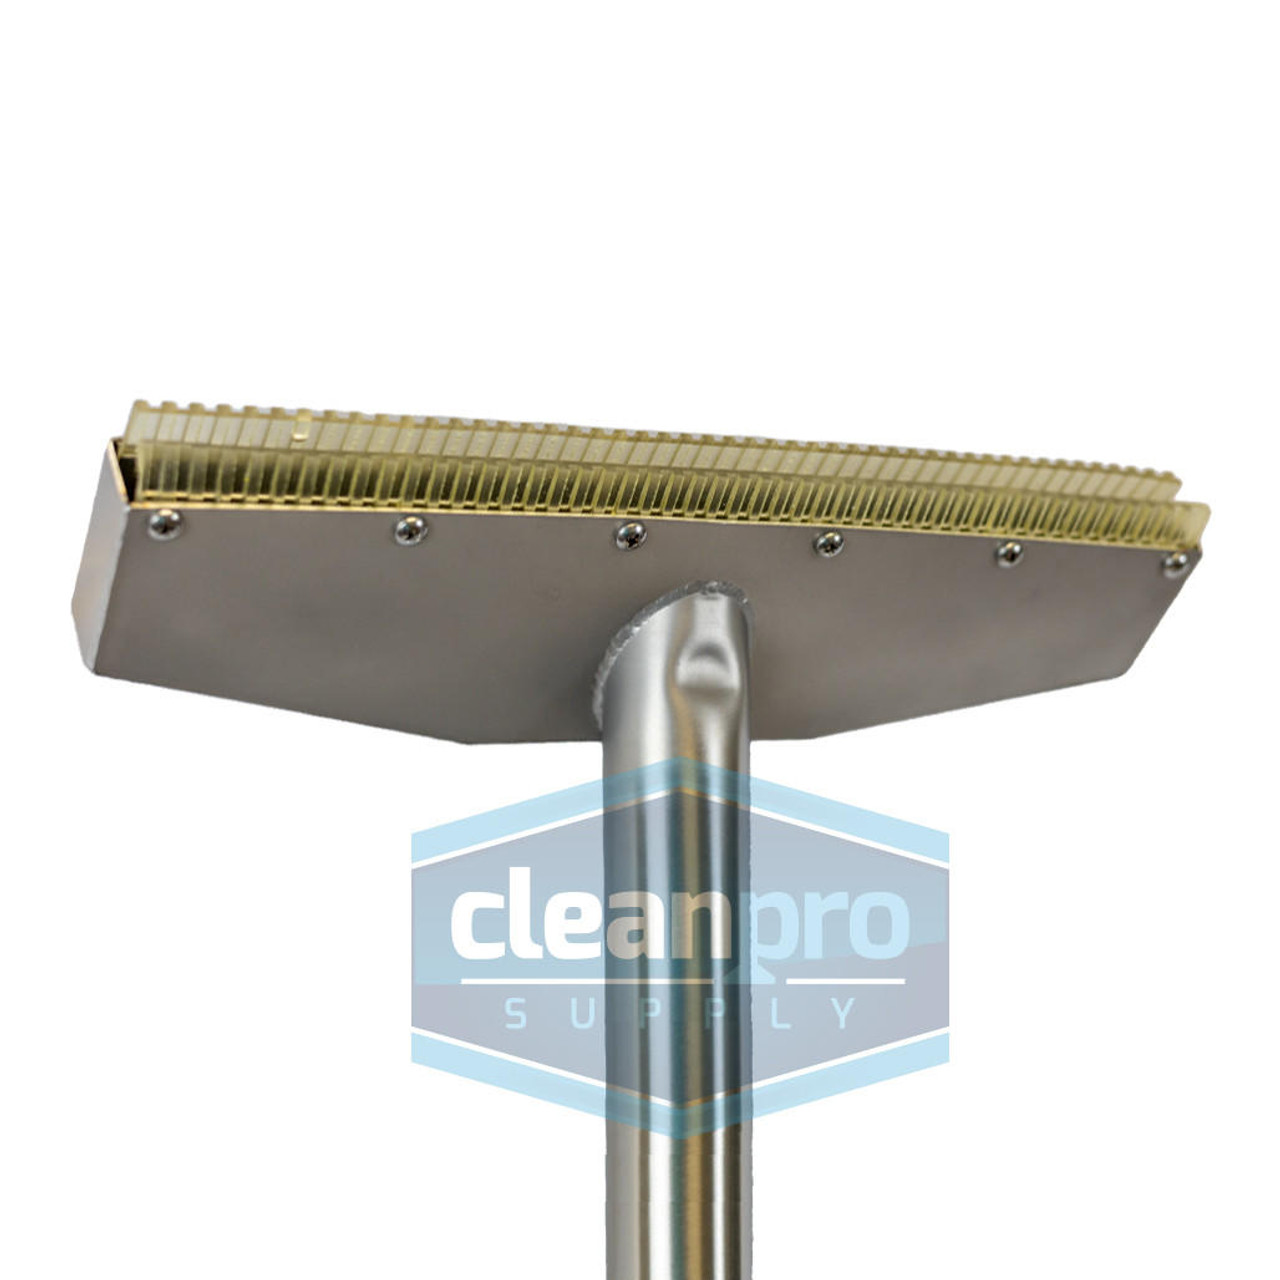 PMF Dry Vacuum Wand w/ Squeegee Head for Concrete Dust